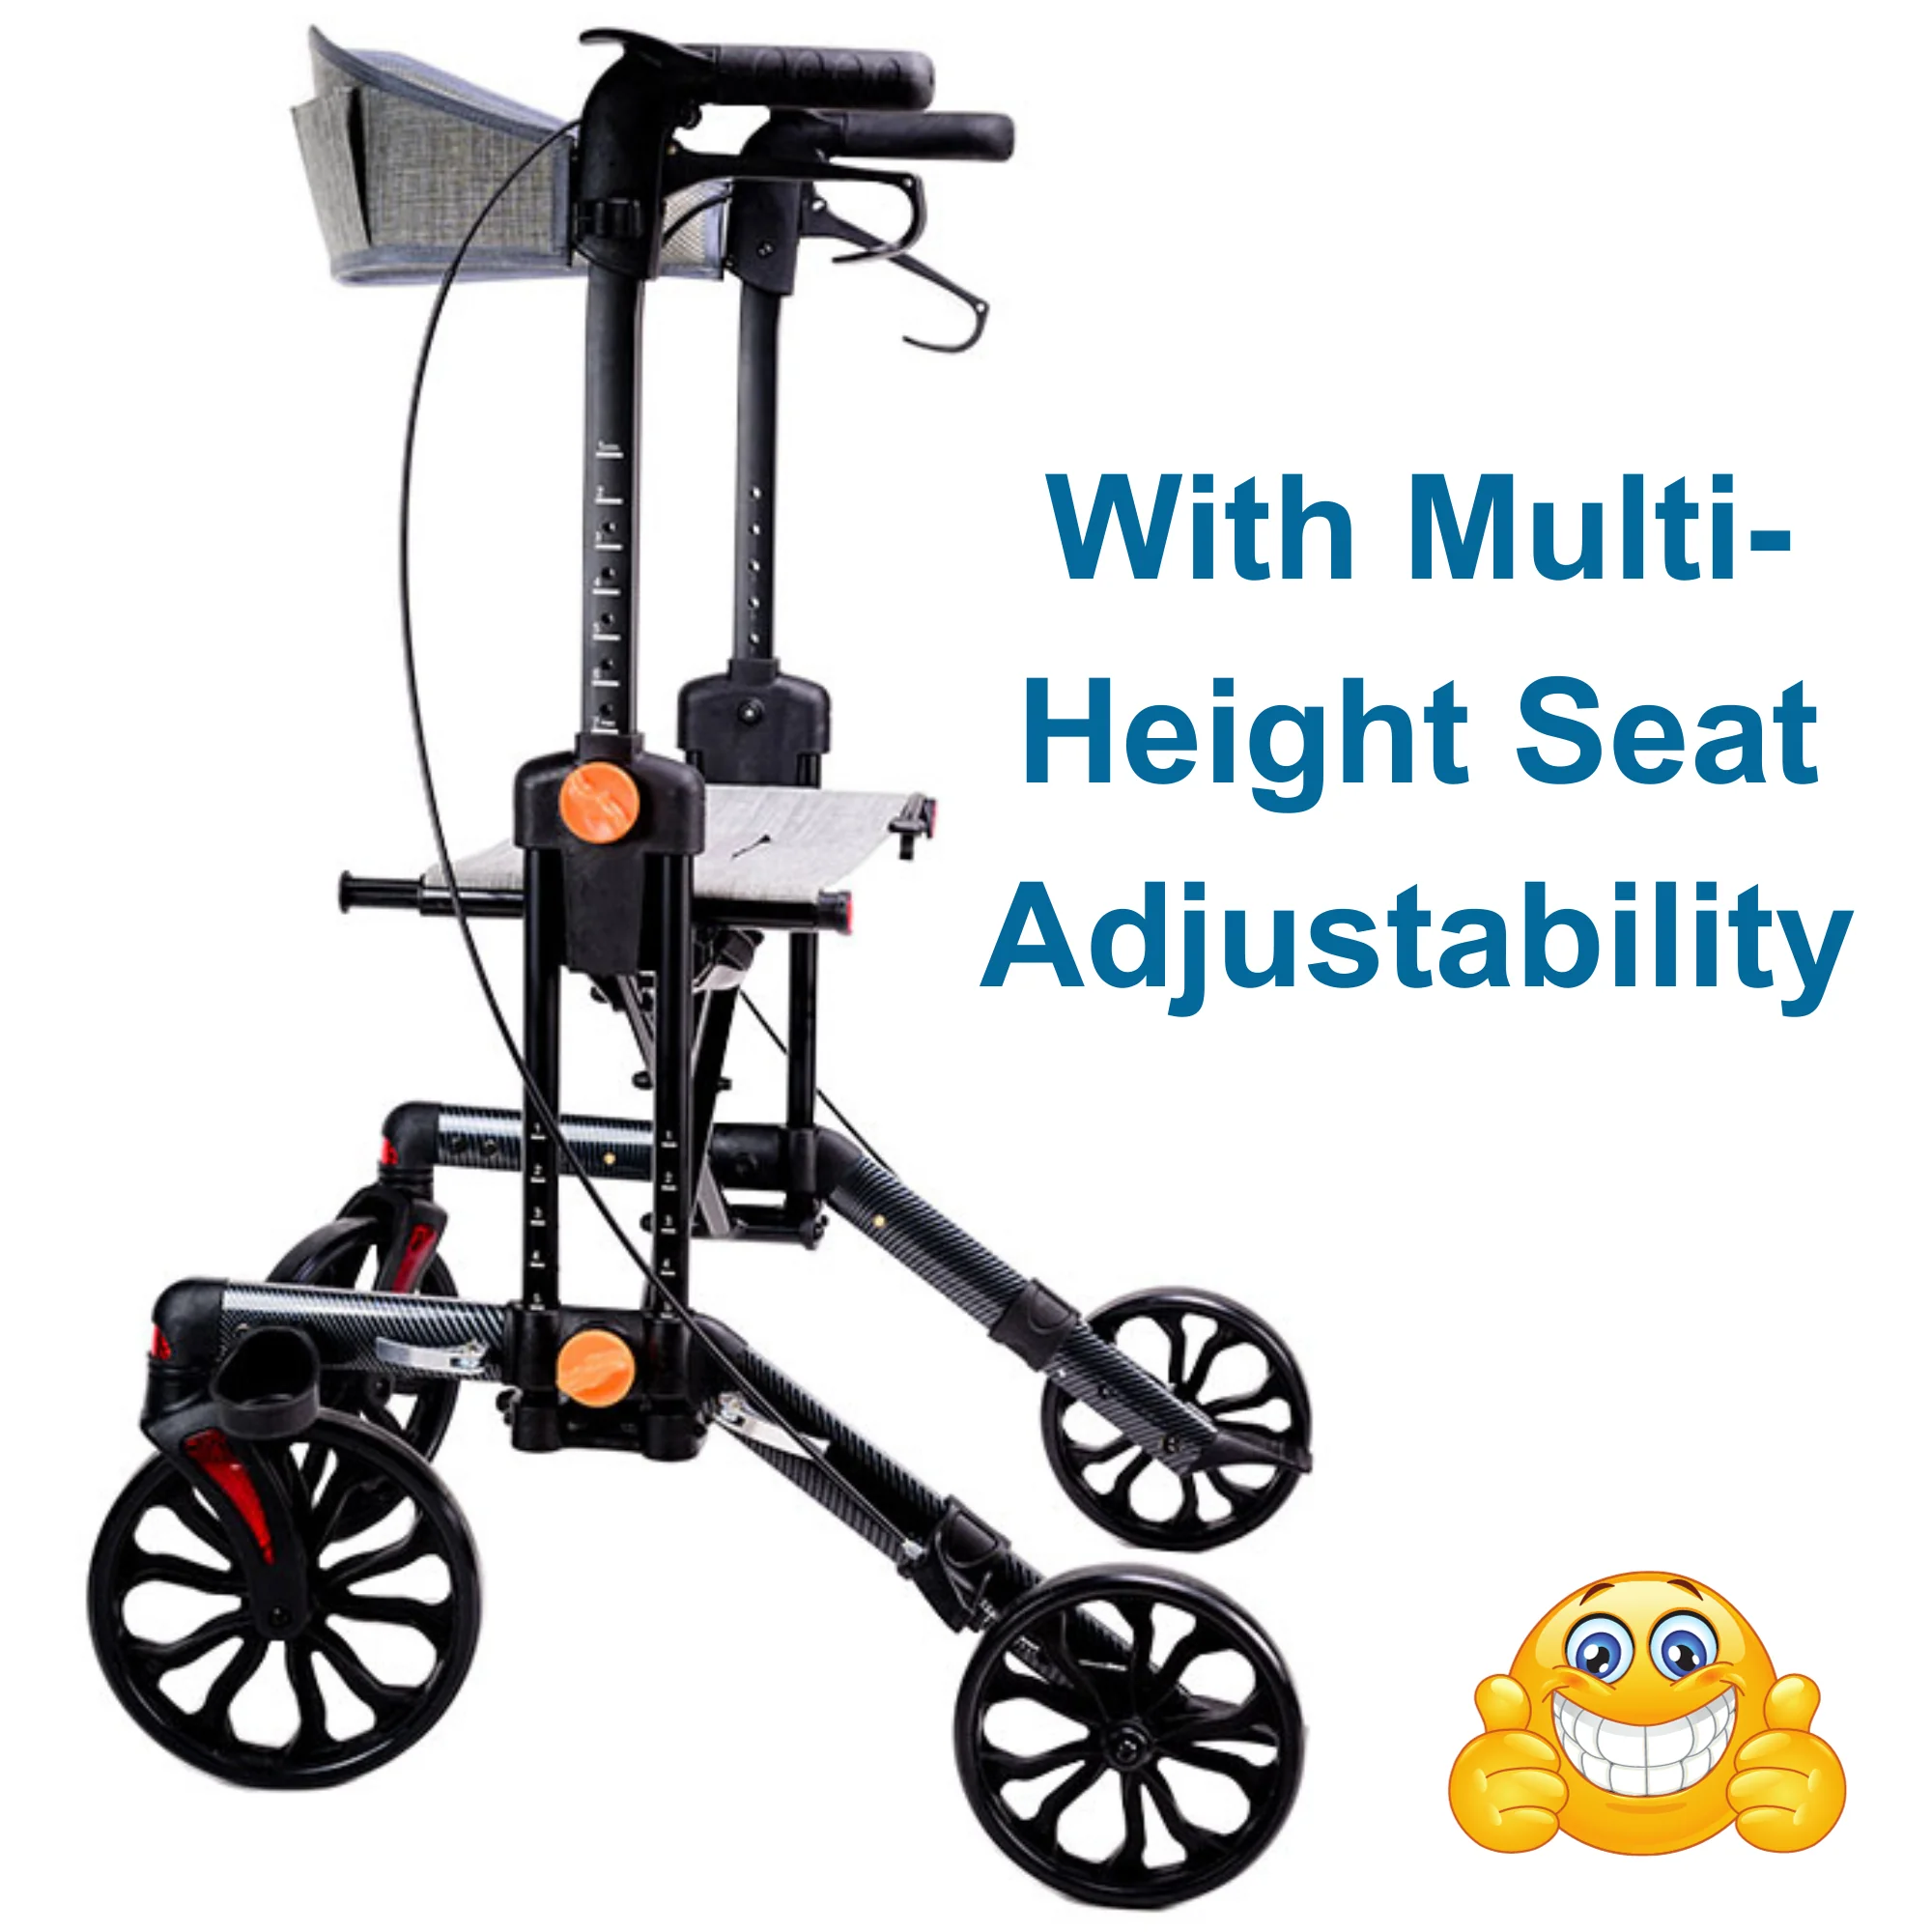 MOBB Stride 3-in-1 Deluxe Rollator, Side-Folding, Multi-Height, Adjustable Black - Picture 9 of 12